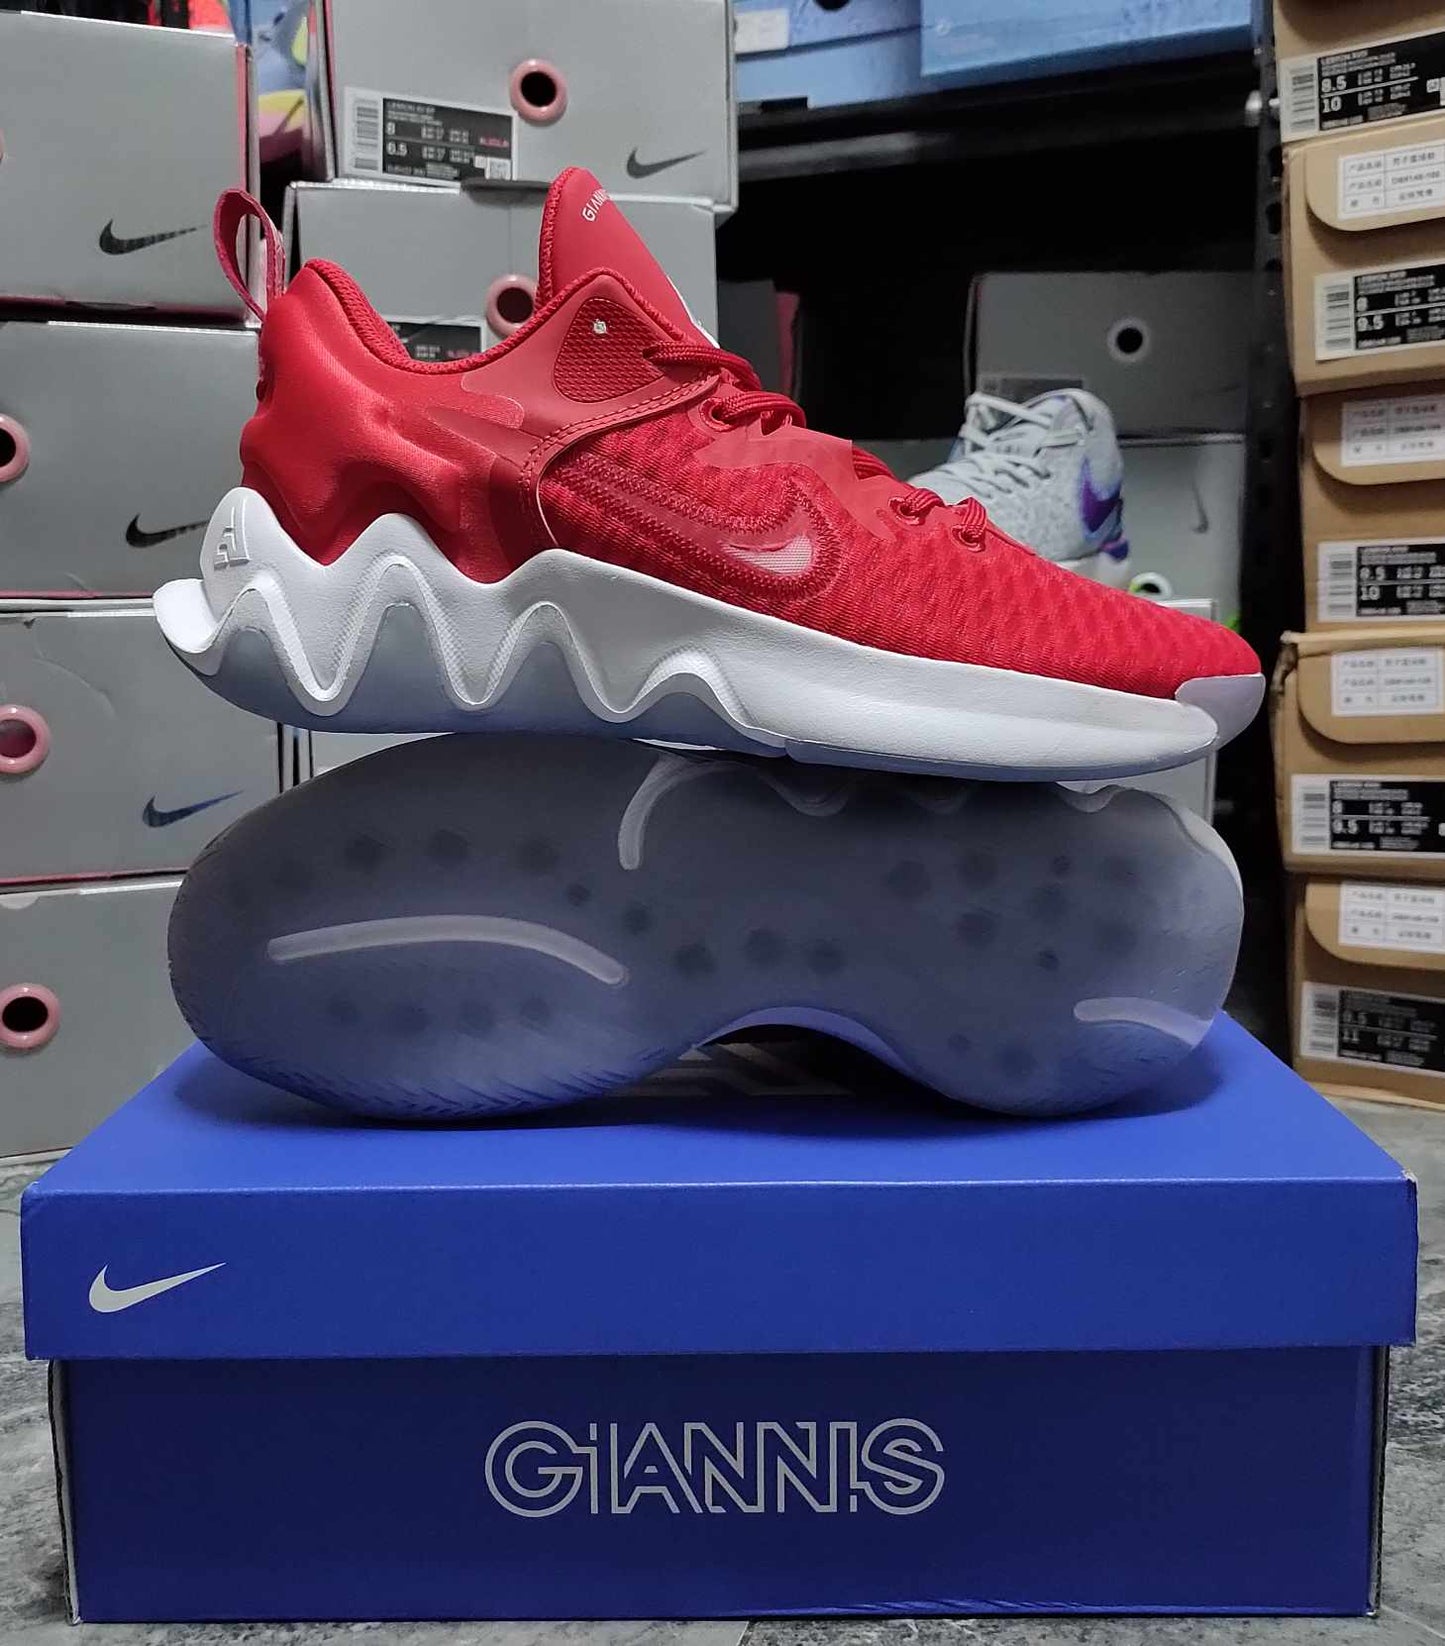 Giannis Immortality 1 "Red"